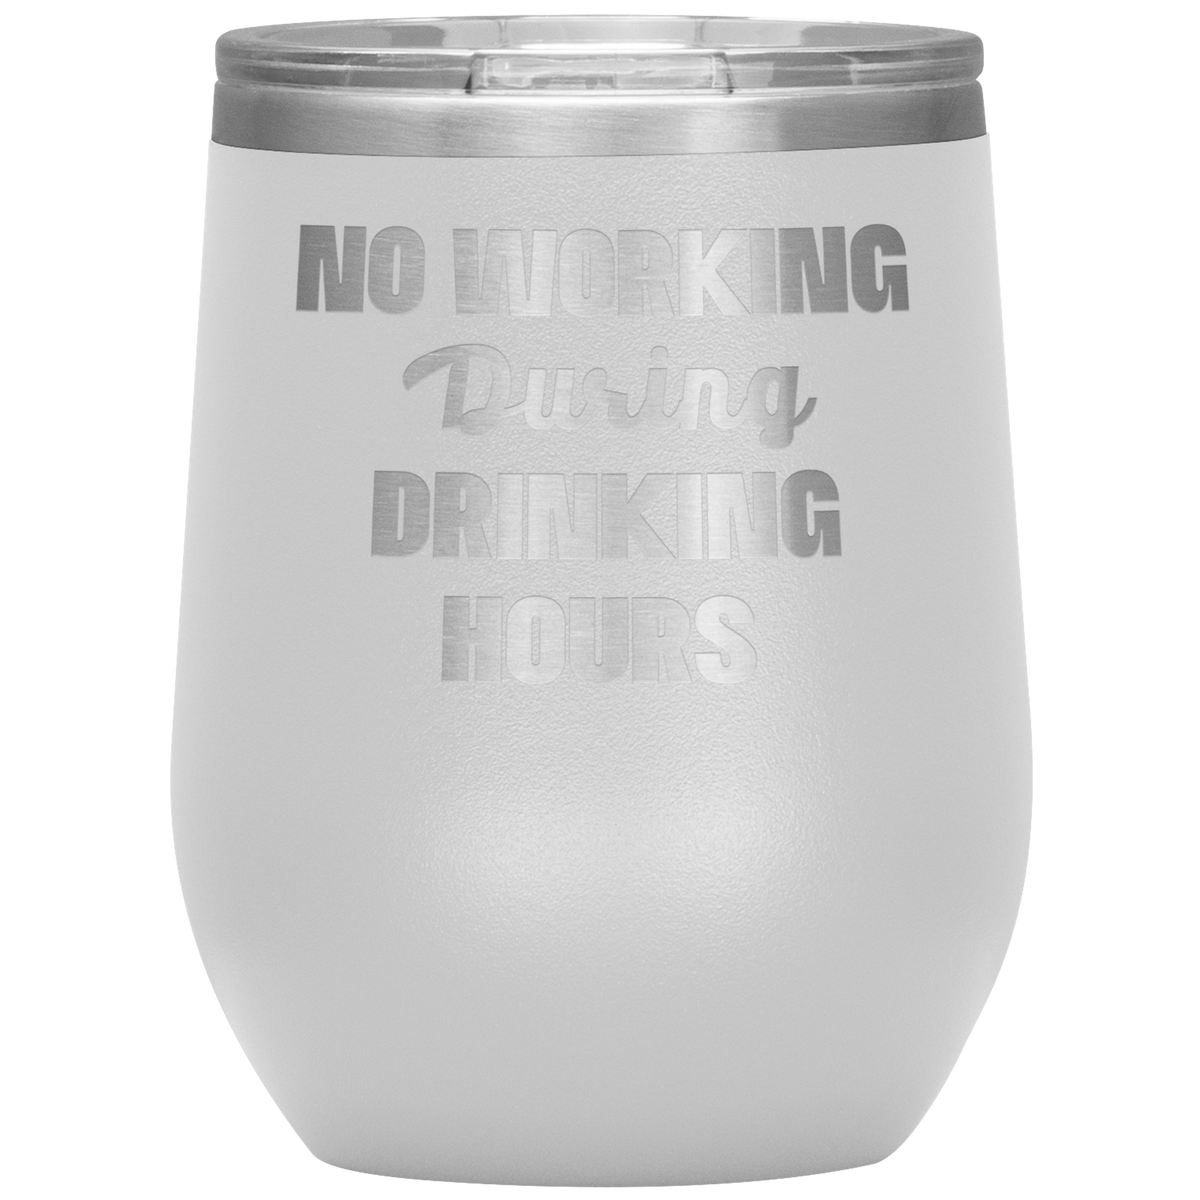 Best Wine Tumbler No Working During Drinking Hours